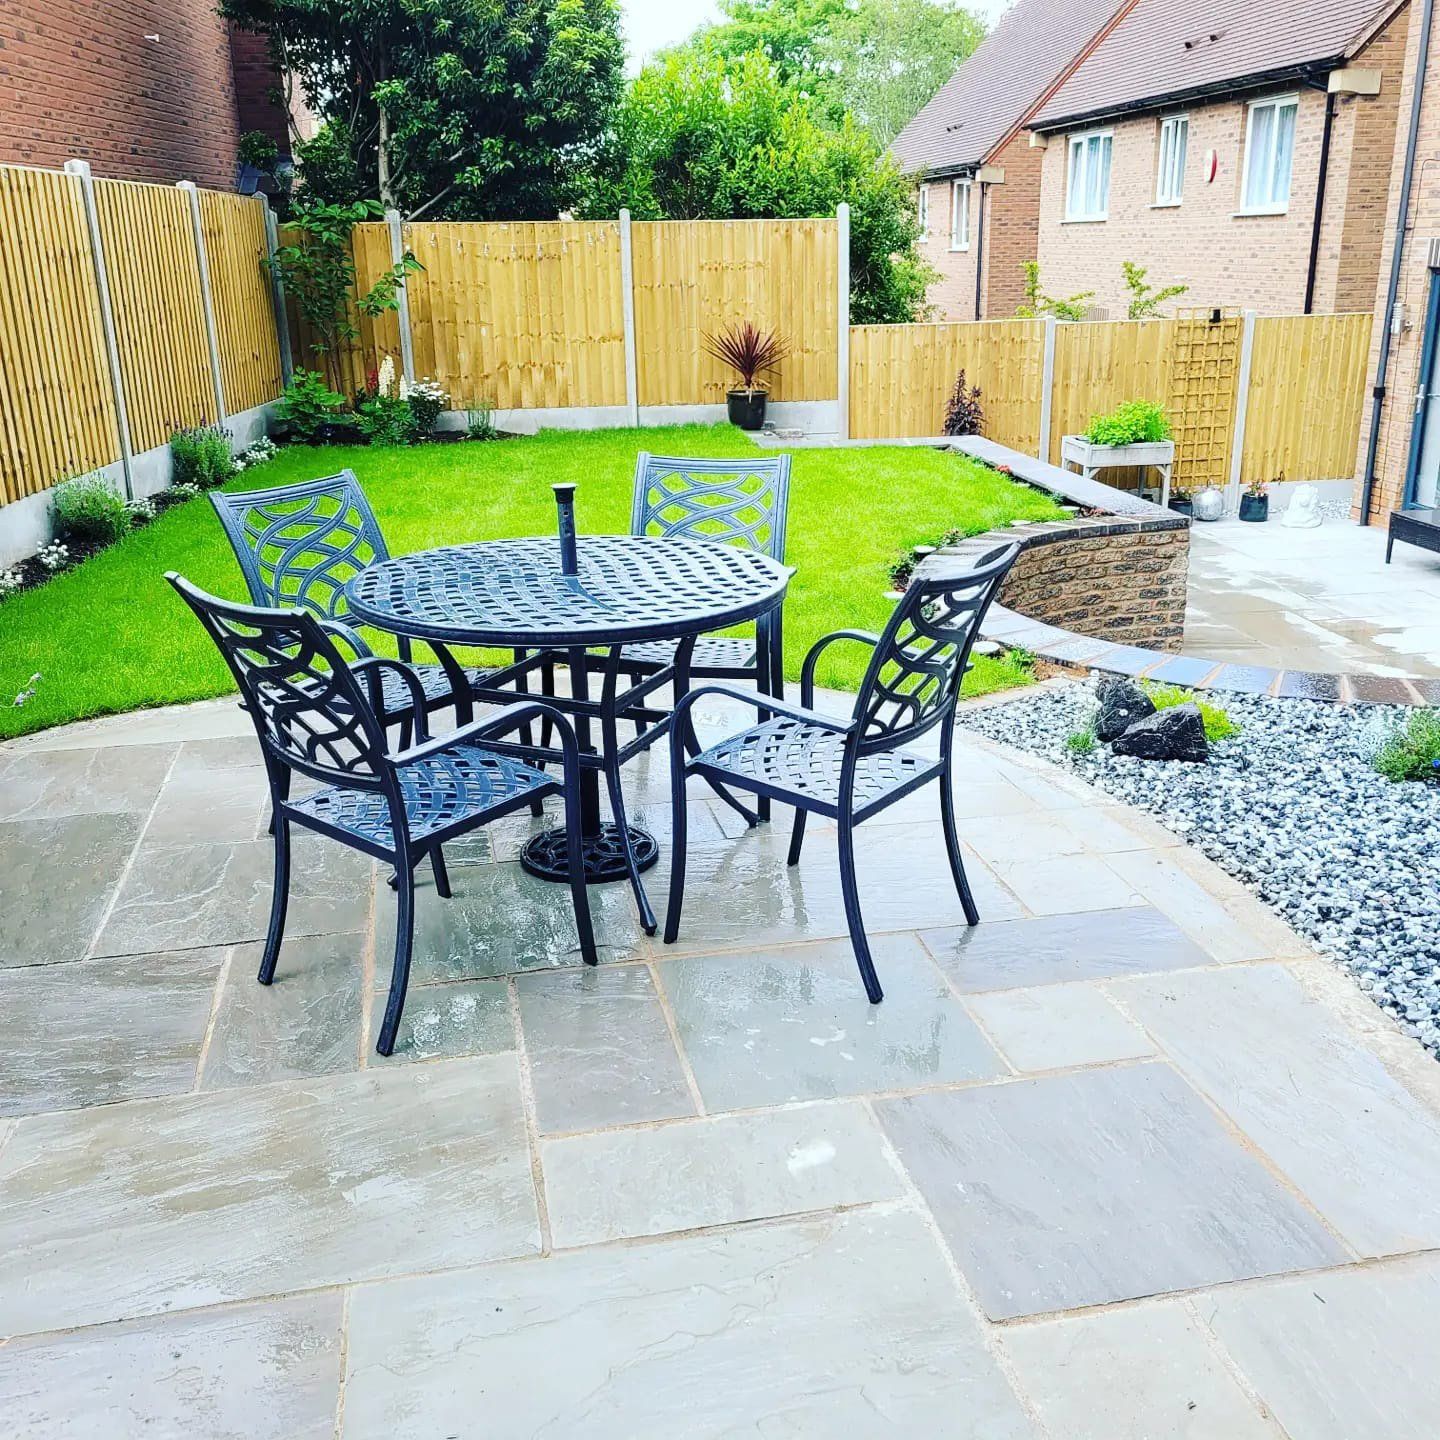 Indian stone patio installed by DNA Landscapes